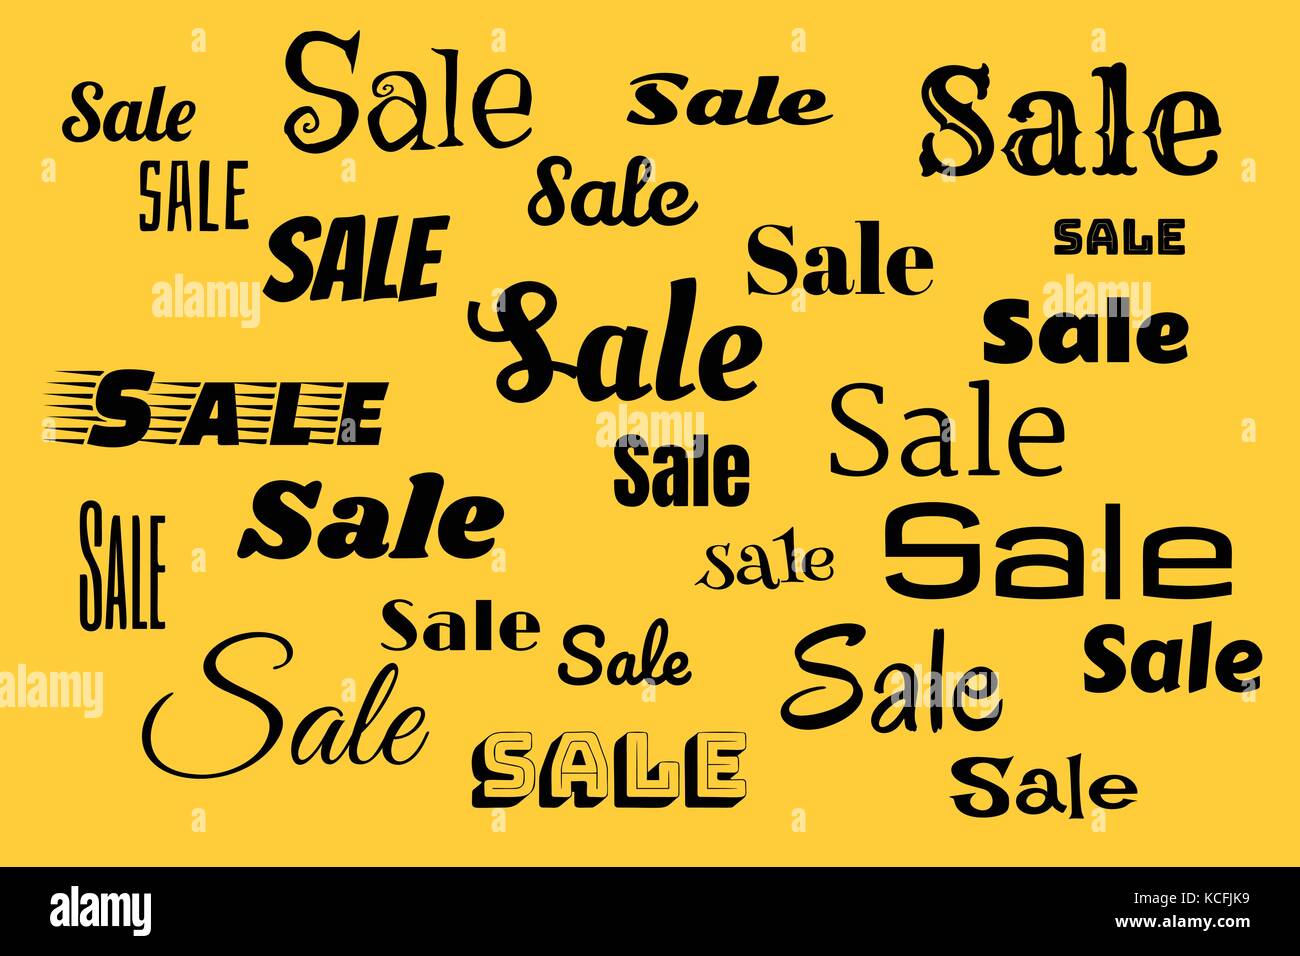 Sales background with black text Stock Vector